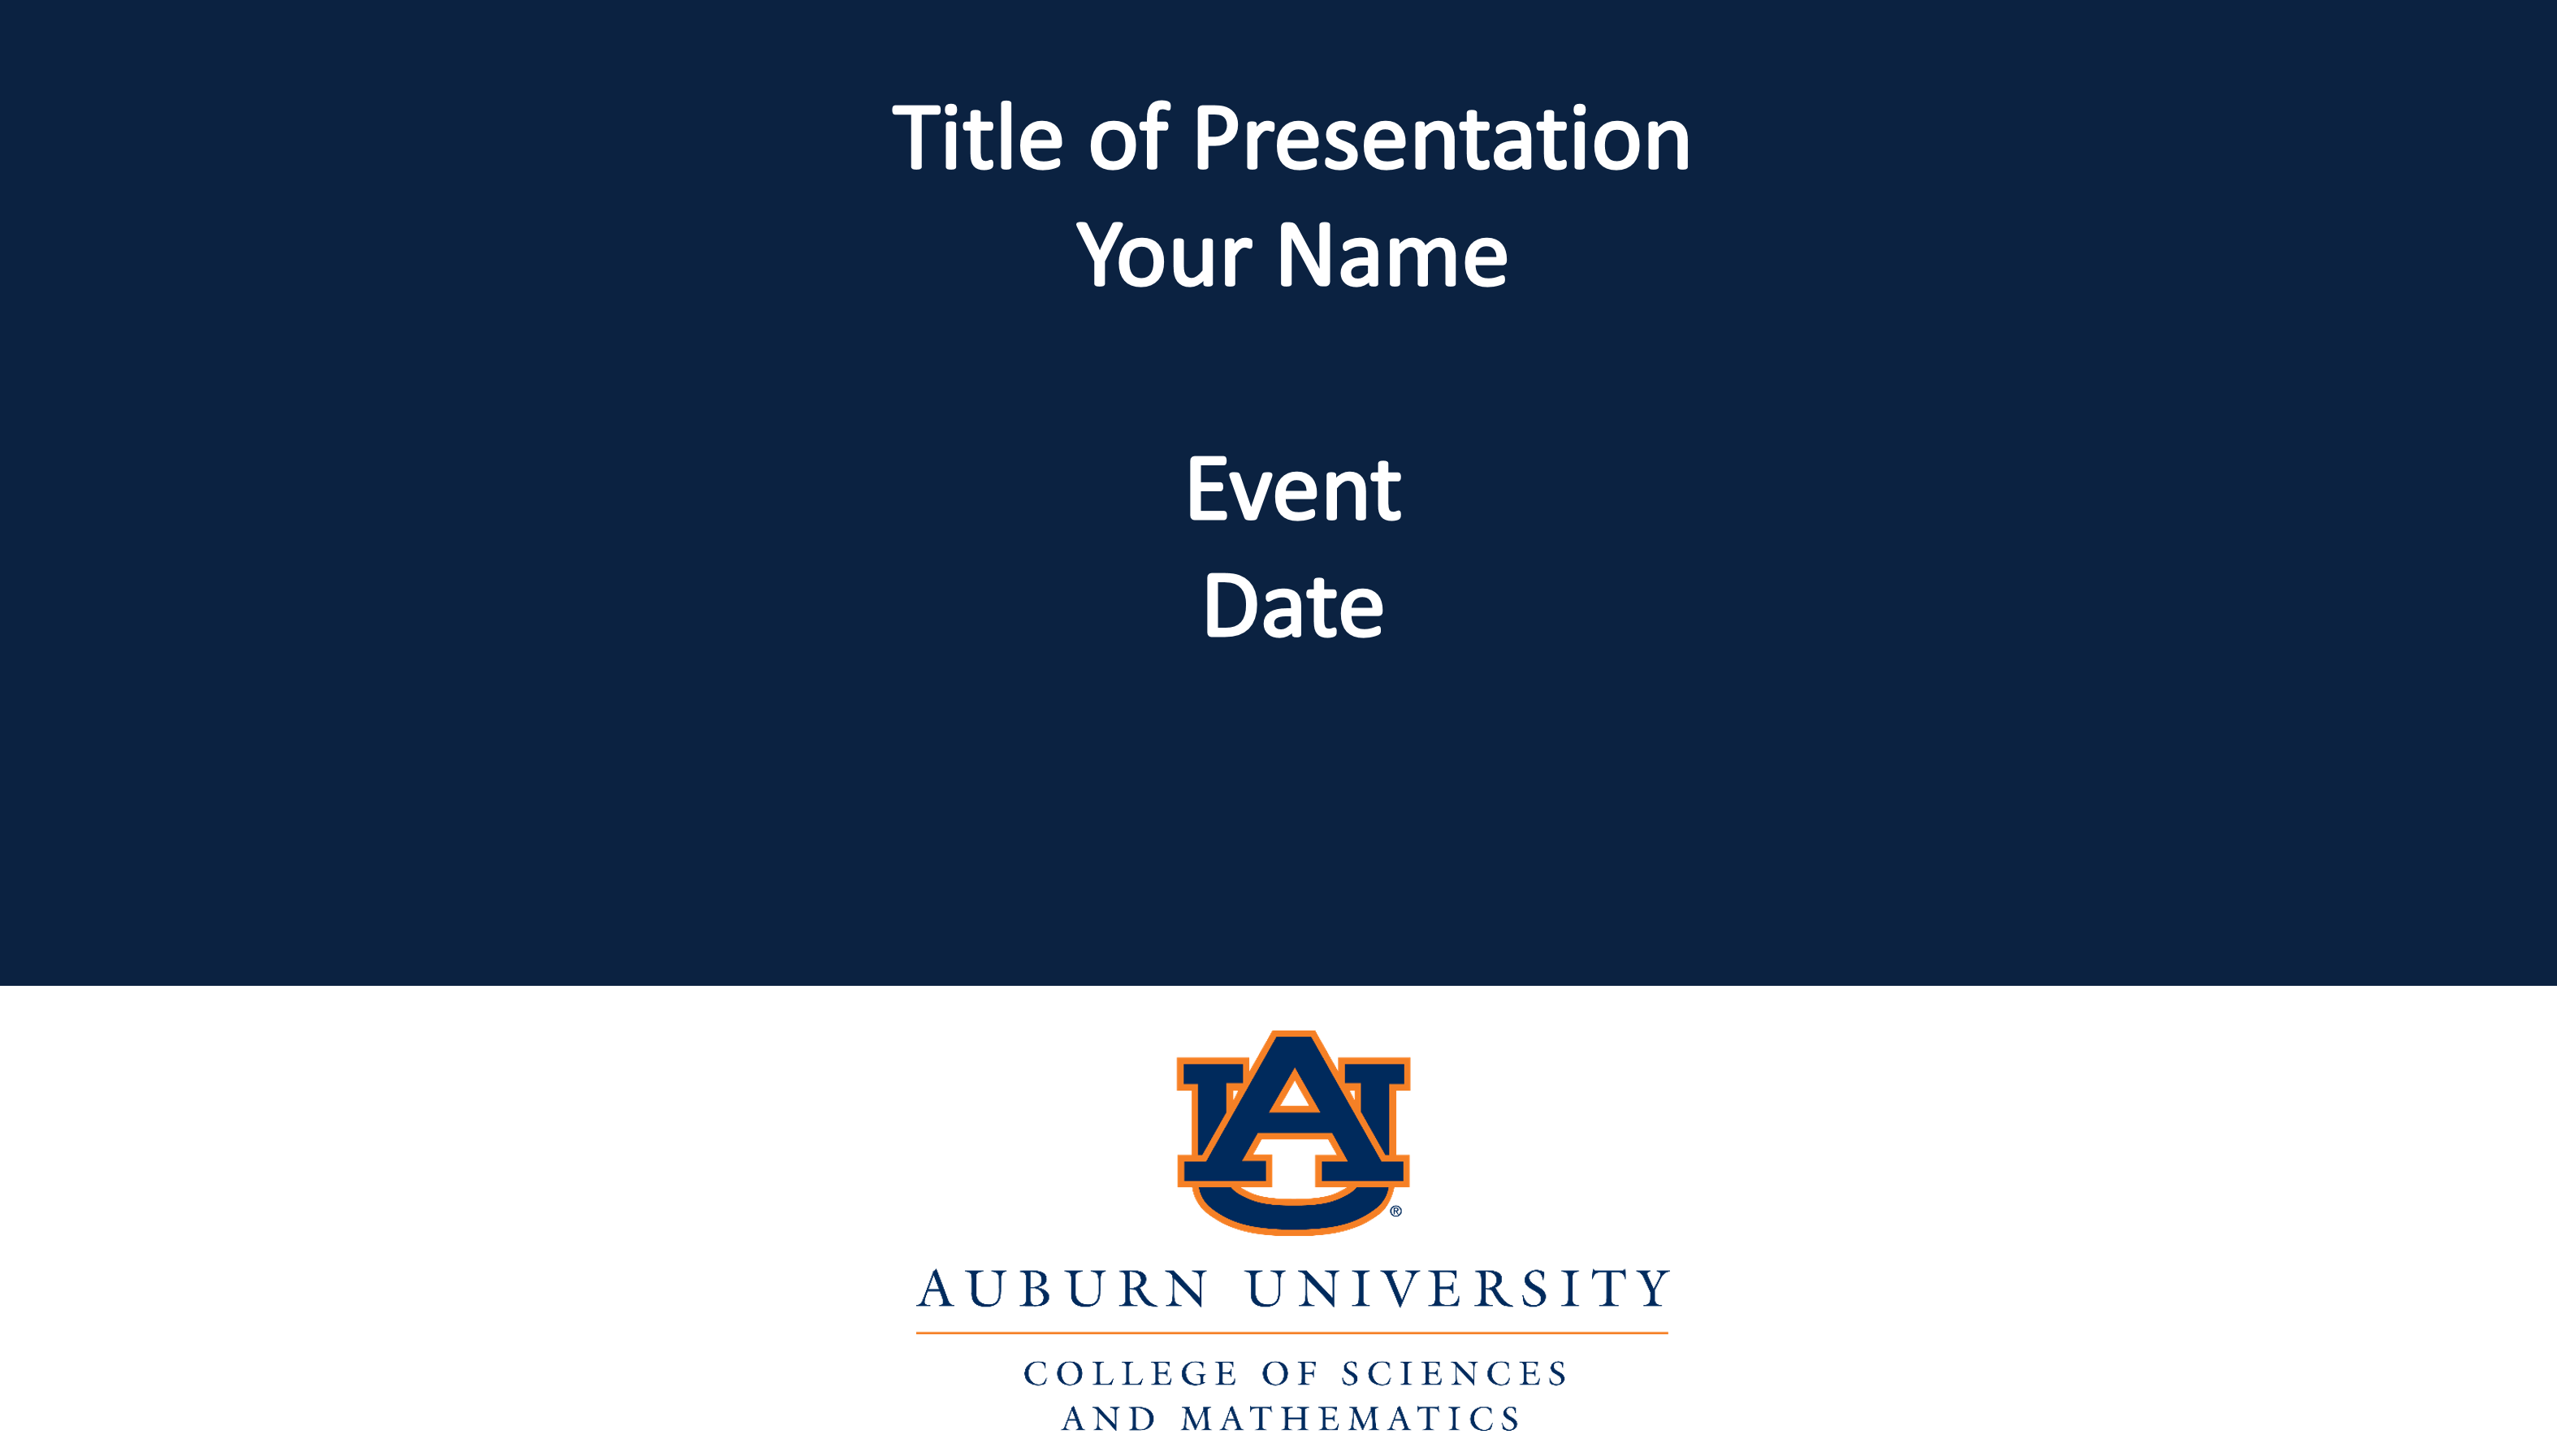 PowerPoint Template with Presentation Title and Name Goes Here